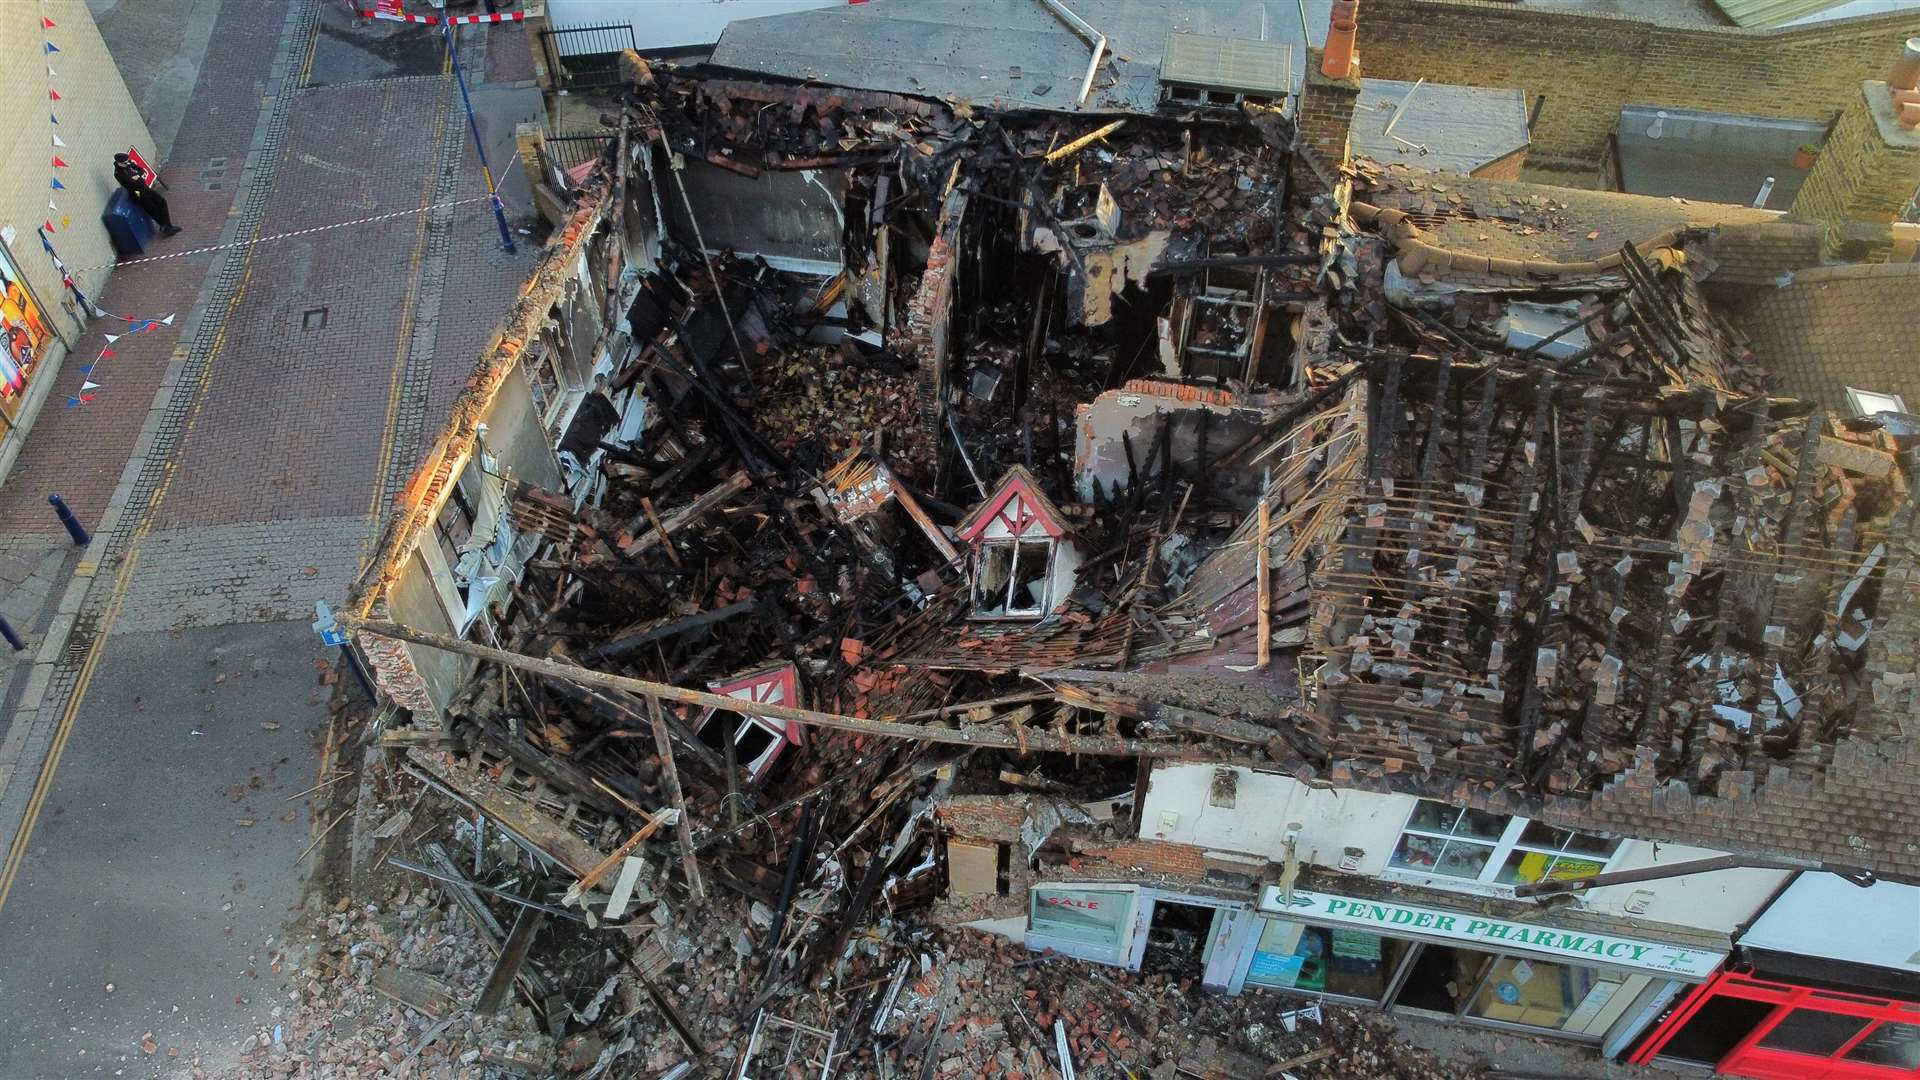 The building has been destroyed